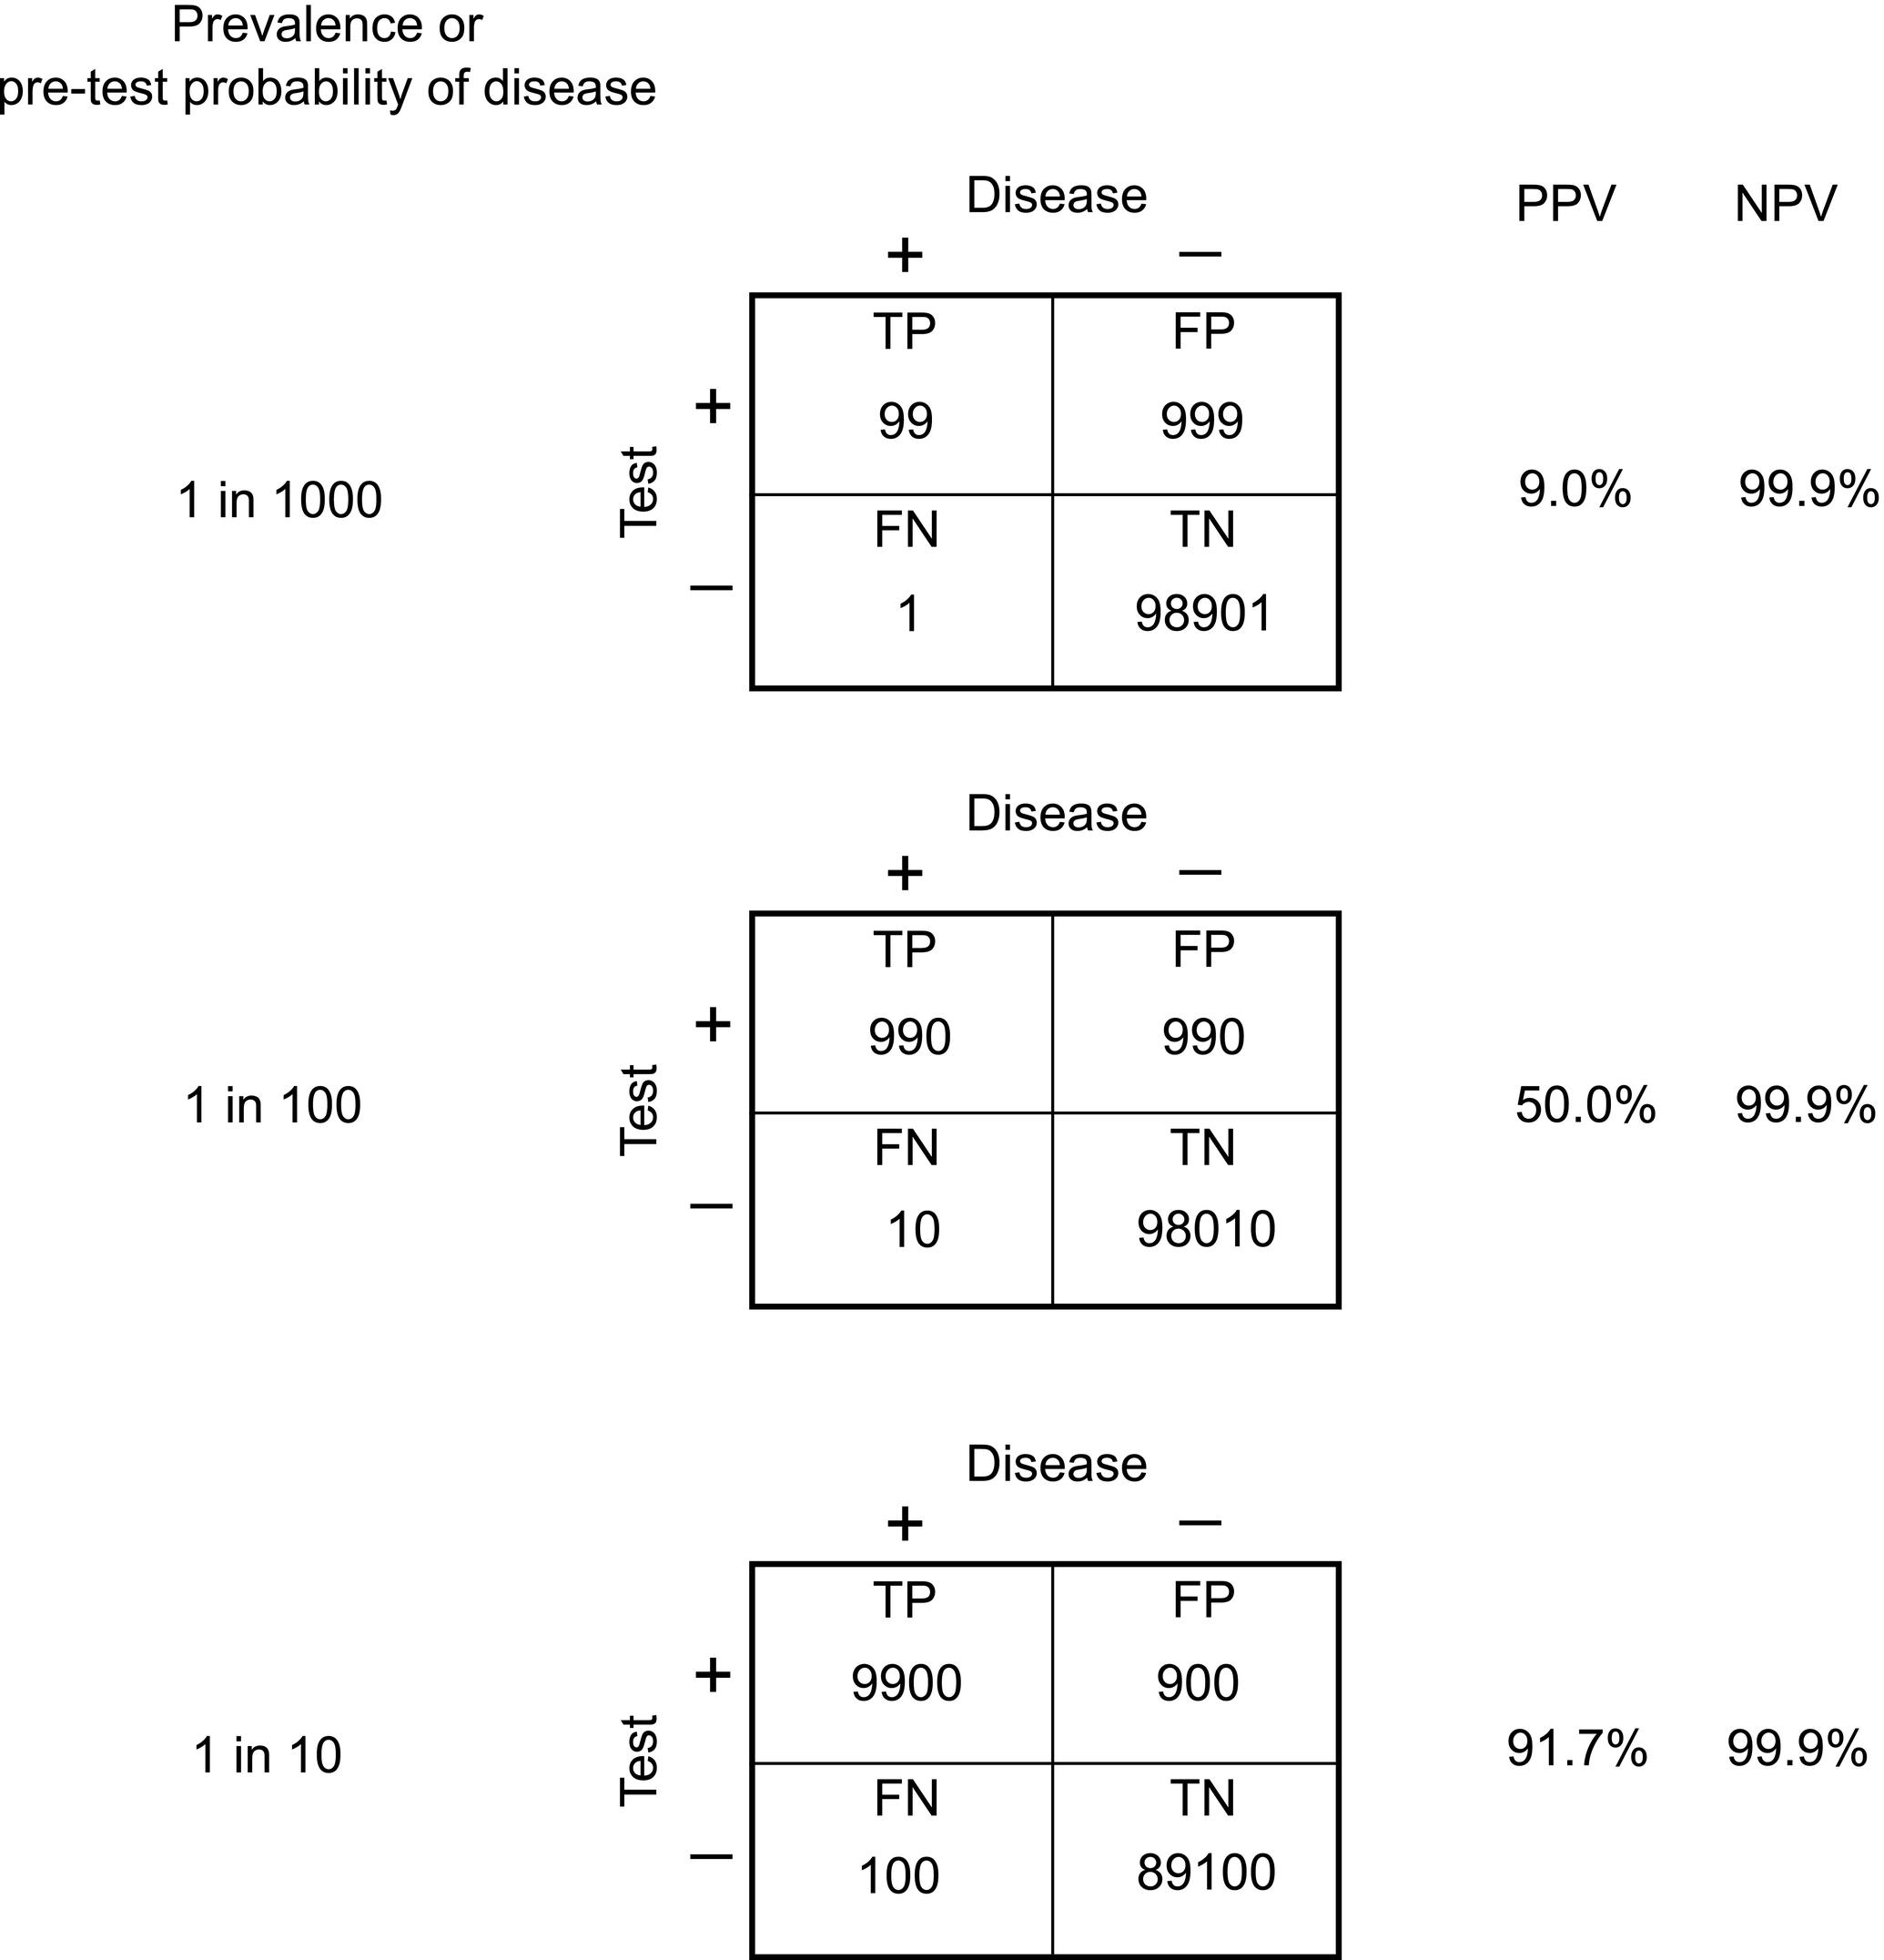 Fig. 4.2, Effect of disease prevalence/pretest probability on positive ( PPV ) and negative ( NPV ) predictive values, using a test with 99% clinical sensitivity and 99% clinical specificity. Numbers in boxes represent the distribution of 100,000 patients among true positives ( TP ), false positives ( FP ), false negatives ( FN ), and true negatives ( TN ).